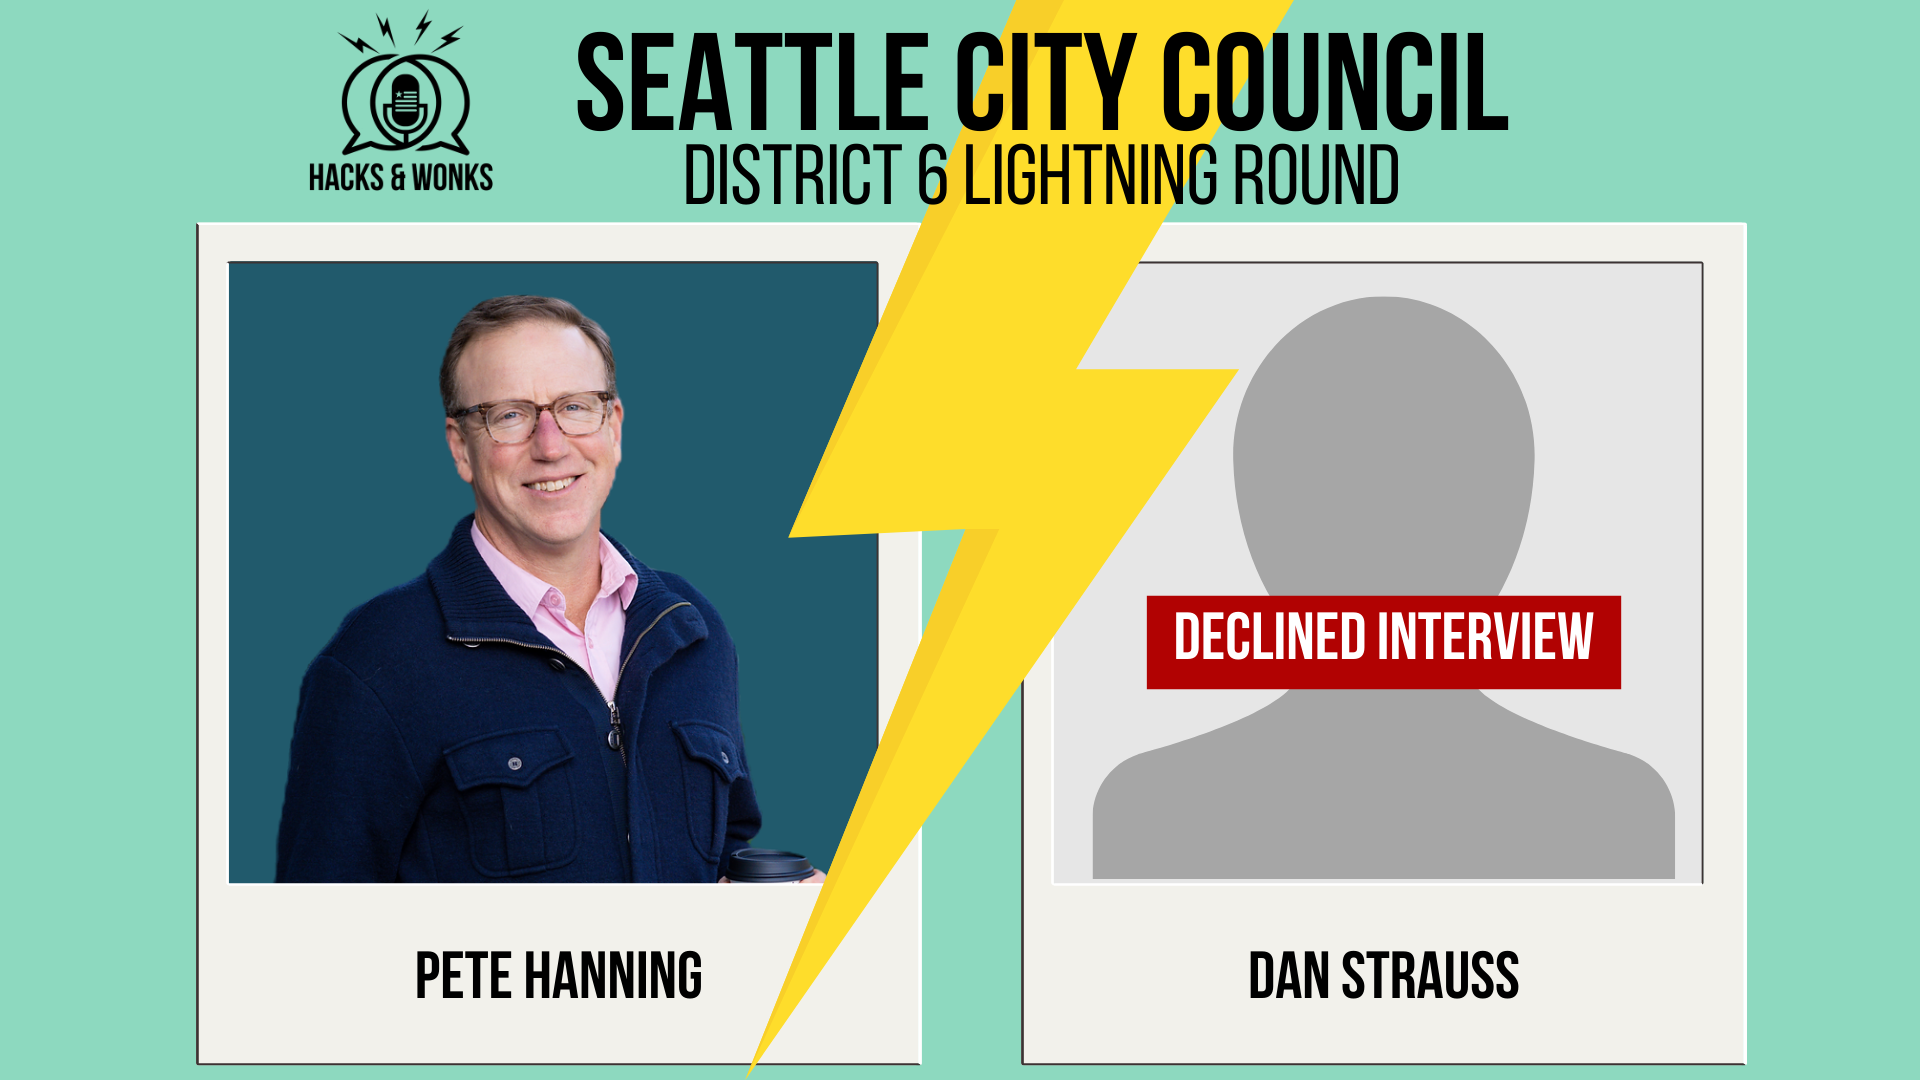 Hacks & Wonks Seattle City Council District 6 Lightning Round  Lightning bolt divides District 6 candidates: Pete Hanning (campaign photo) and Dan Strauss (placeholder image with “Declined Interview” across it)